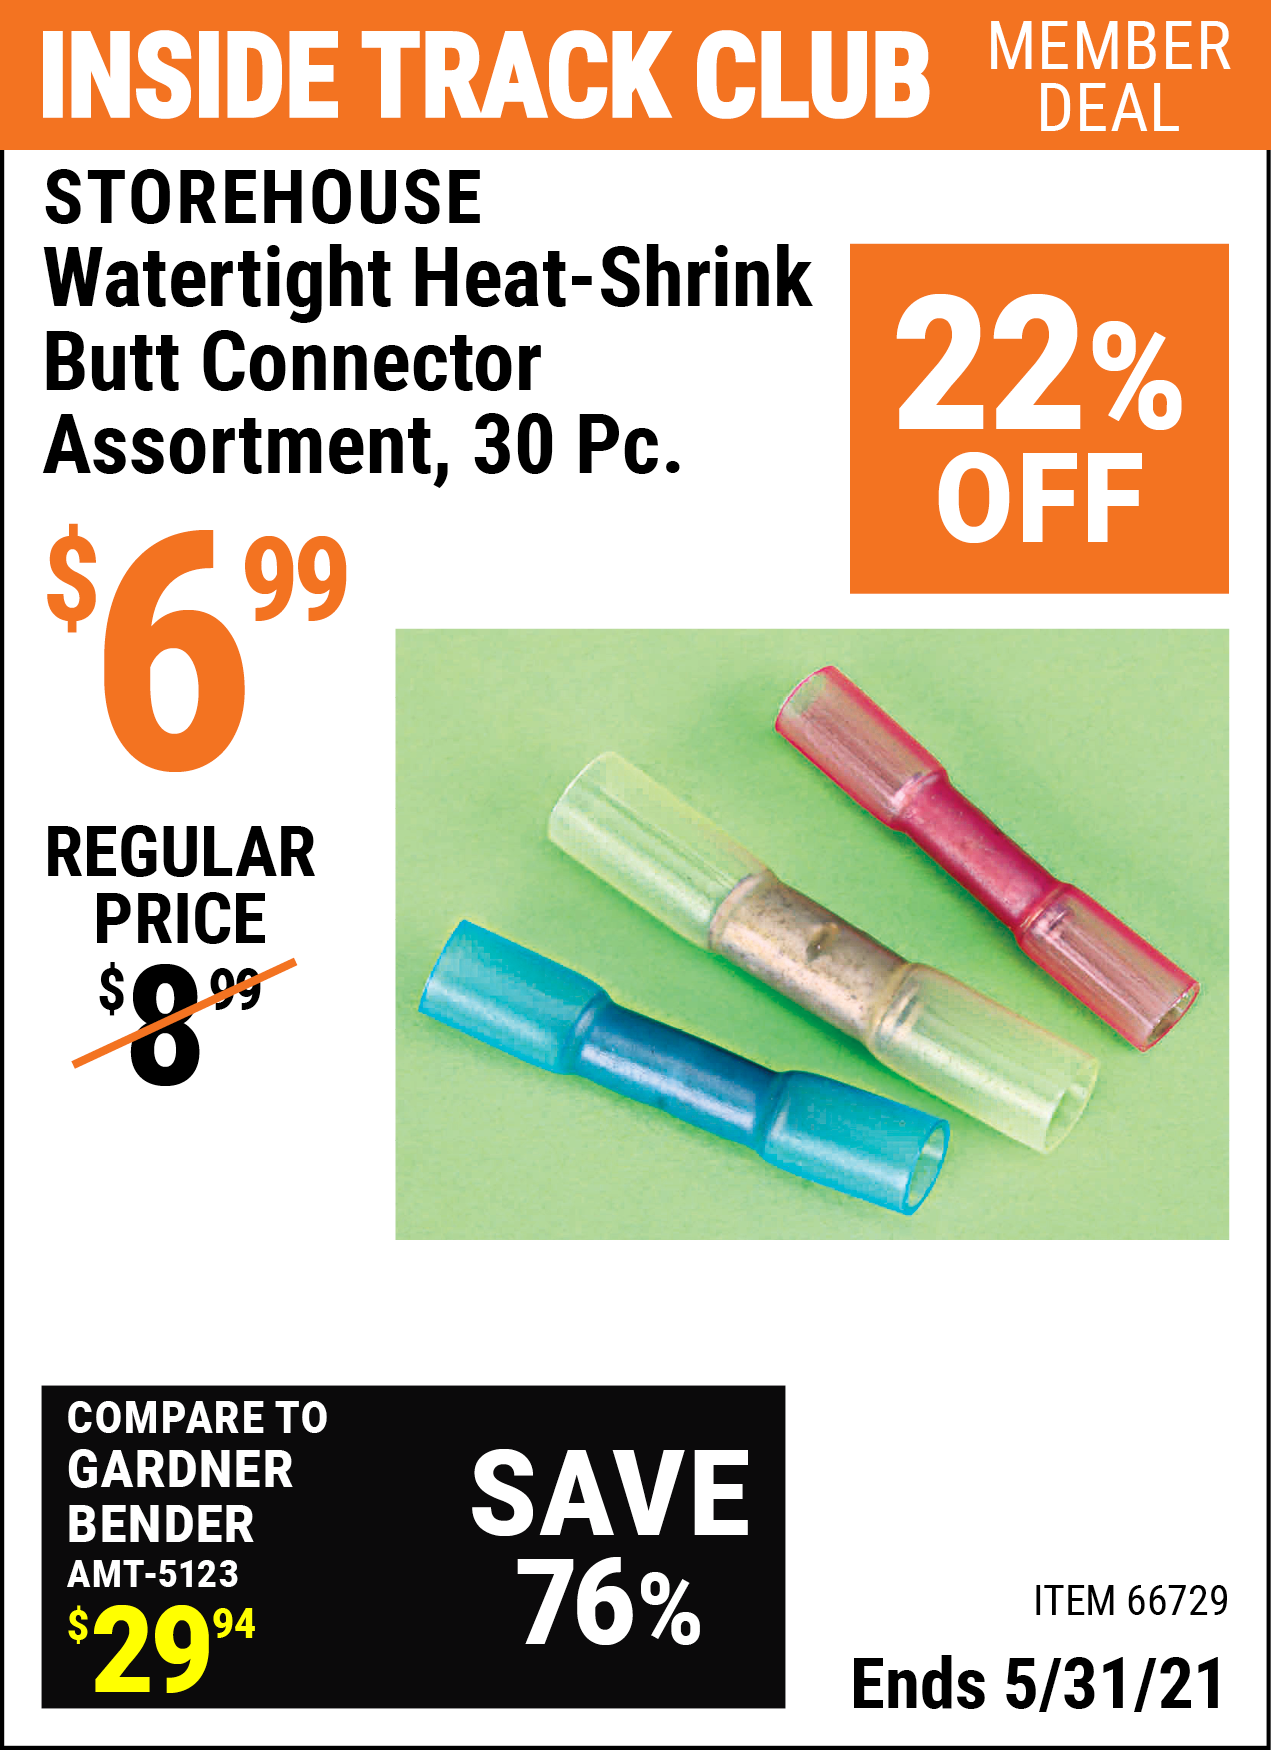 Inside Track Club members can buy the STOREHOUSE Watertight Heat-Shrink Butt Connector Assortment 30 Pc. (Item 66729) for $6.99, valid through 5/31/2021.